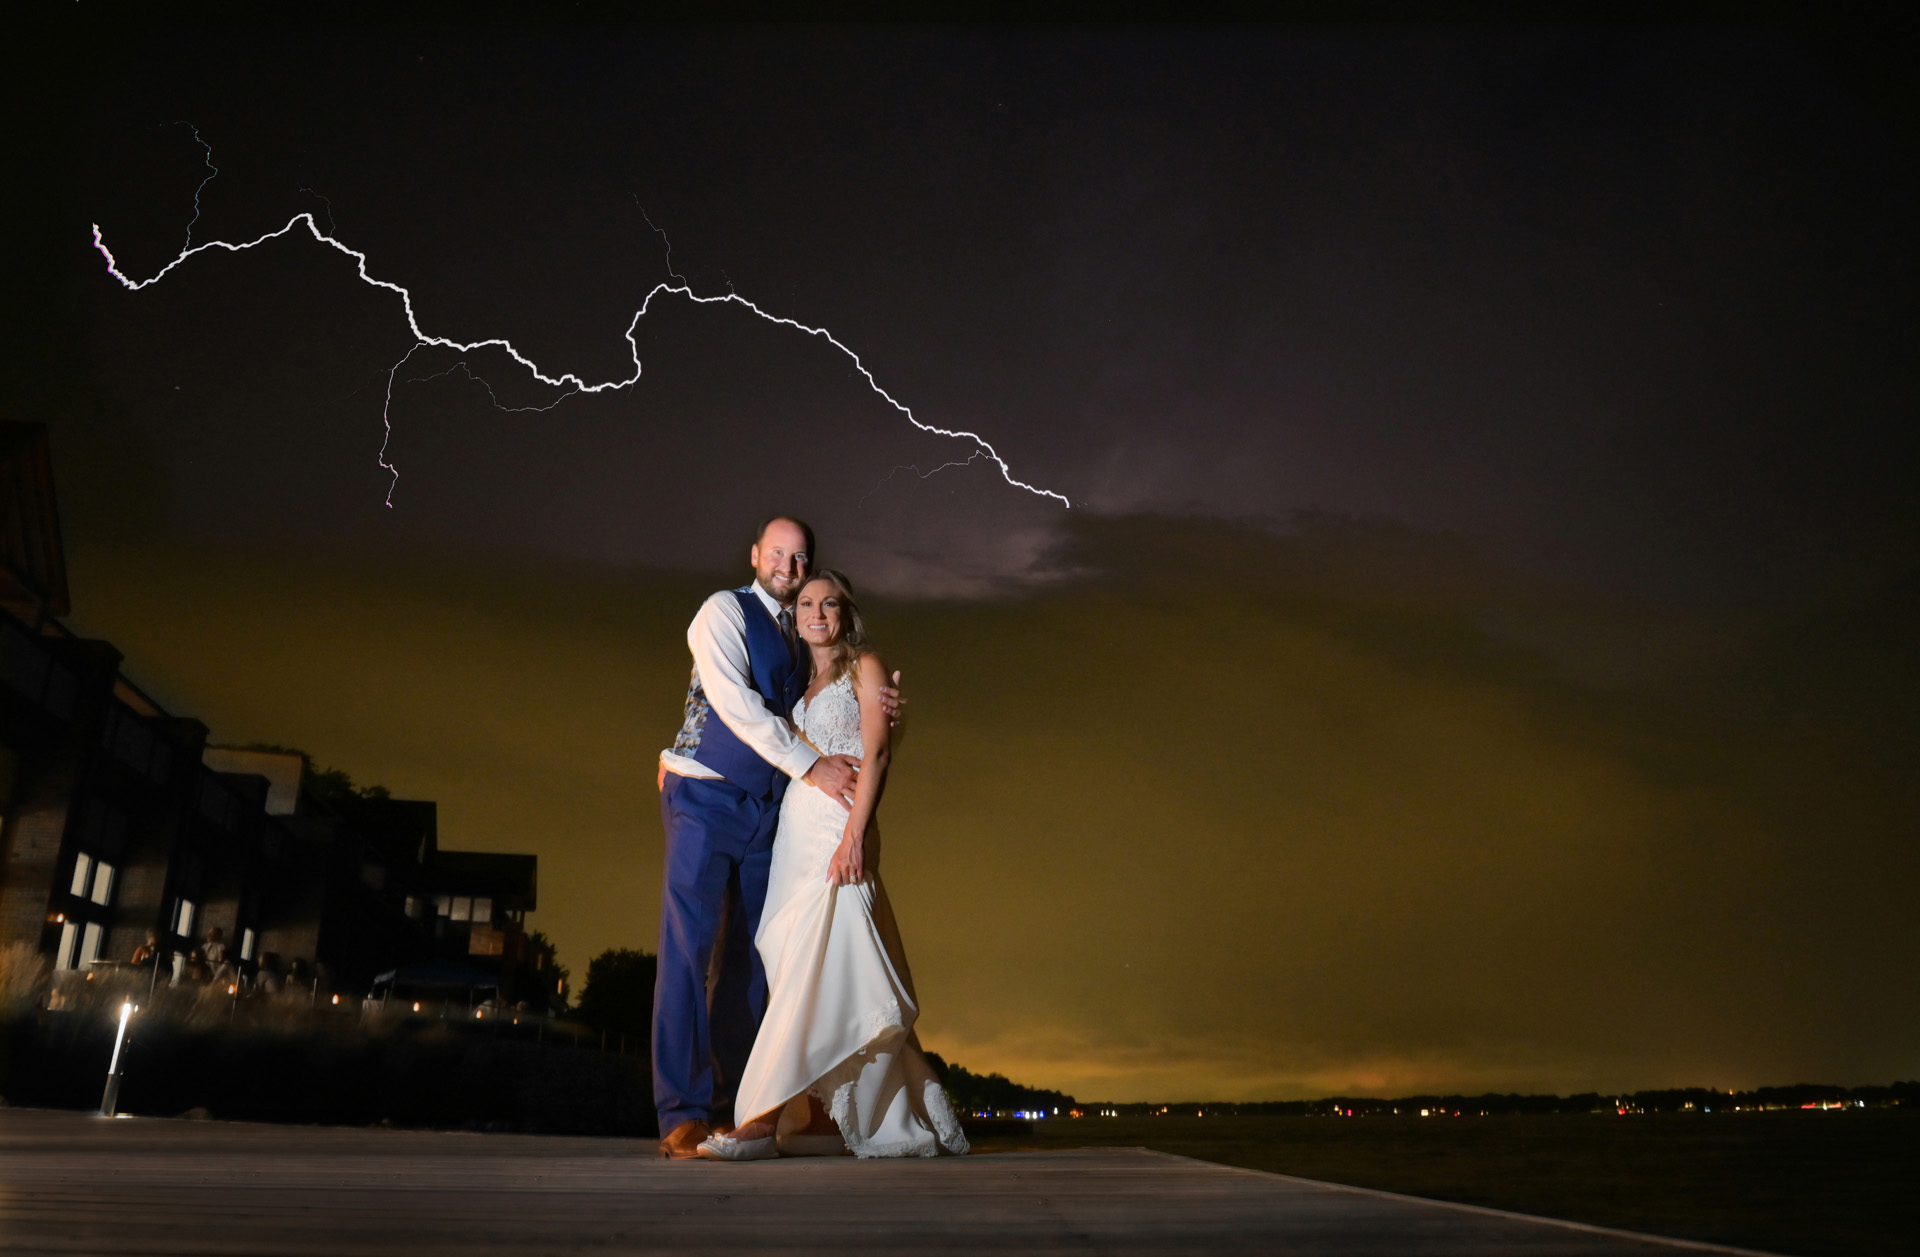 The bride and groom take a quick photo during their wedding reception at the St. Clair Inn in St. Clair Michigan just as a weird summer storm blew in from the lake.